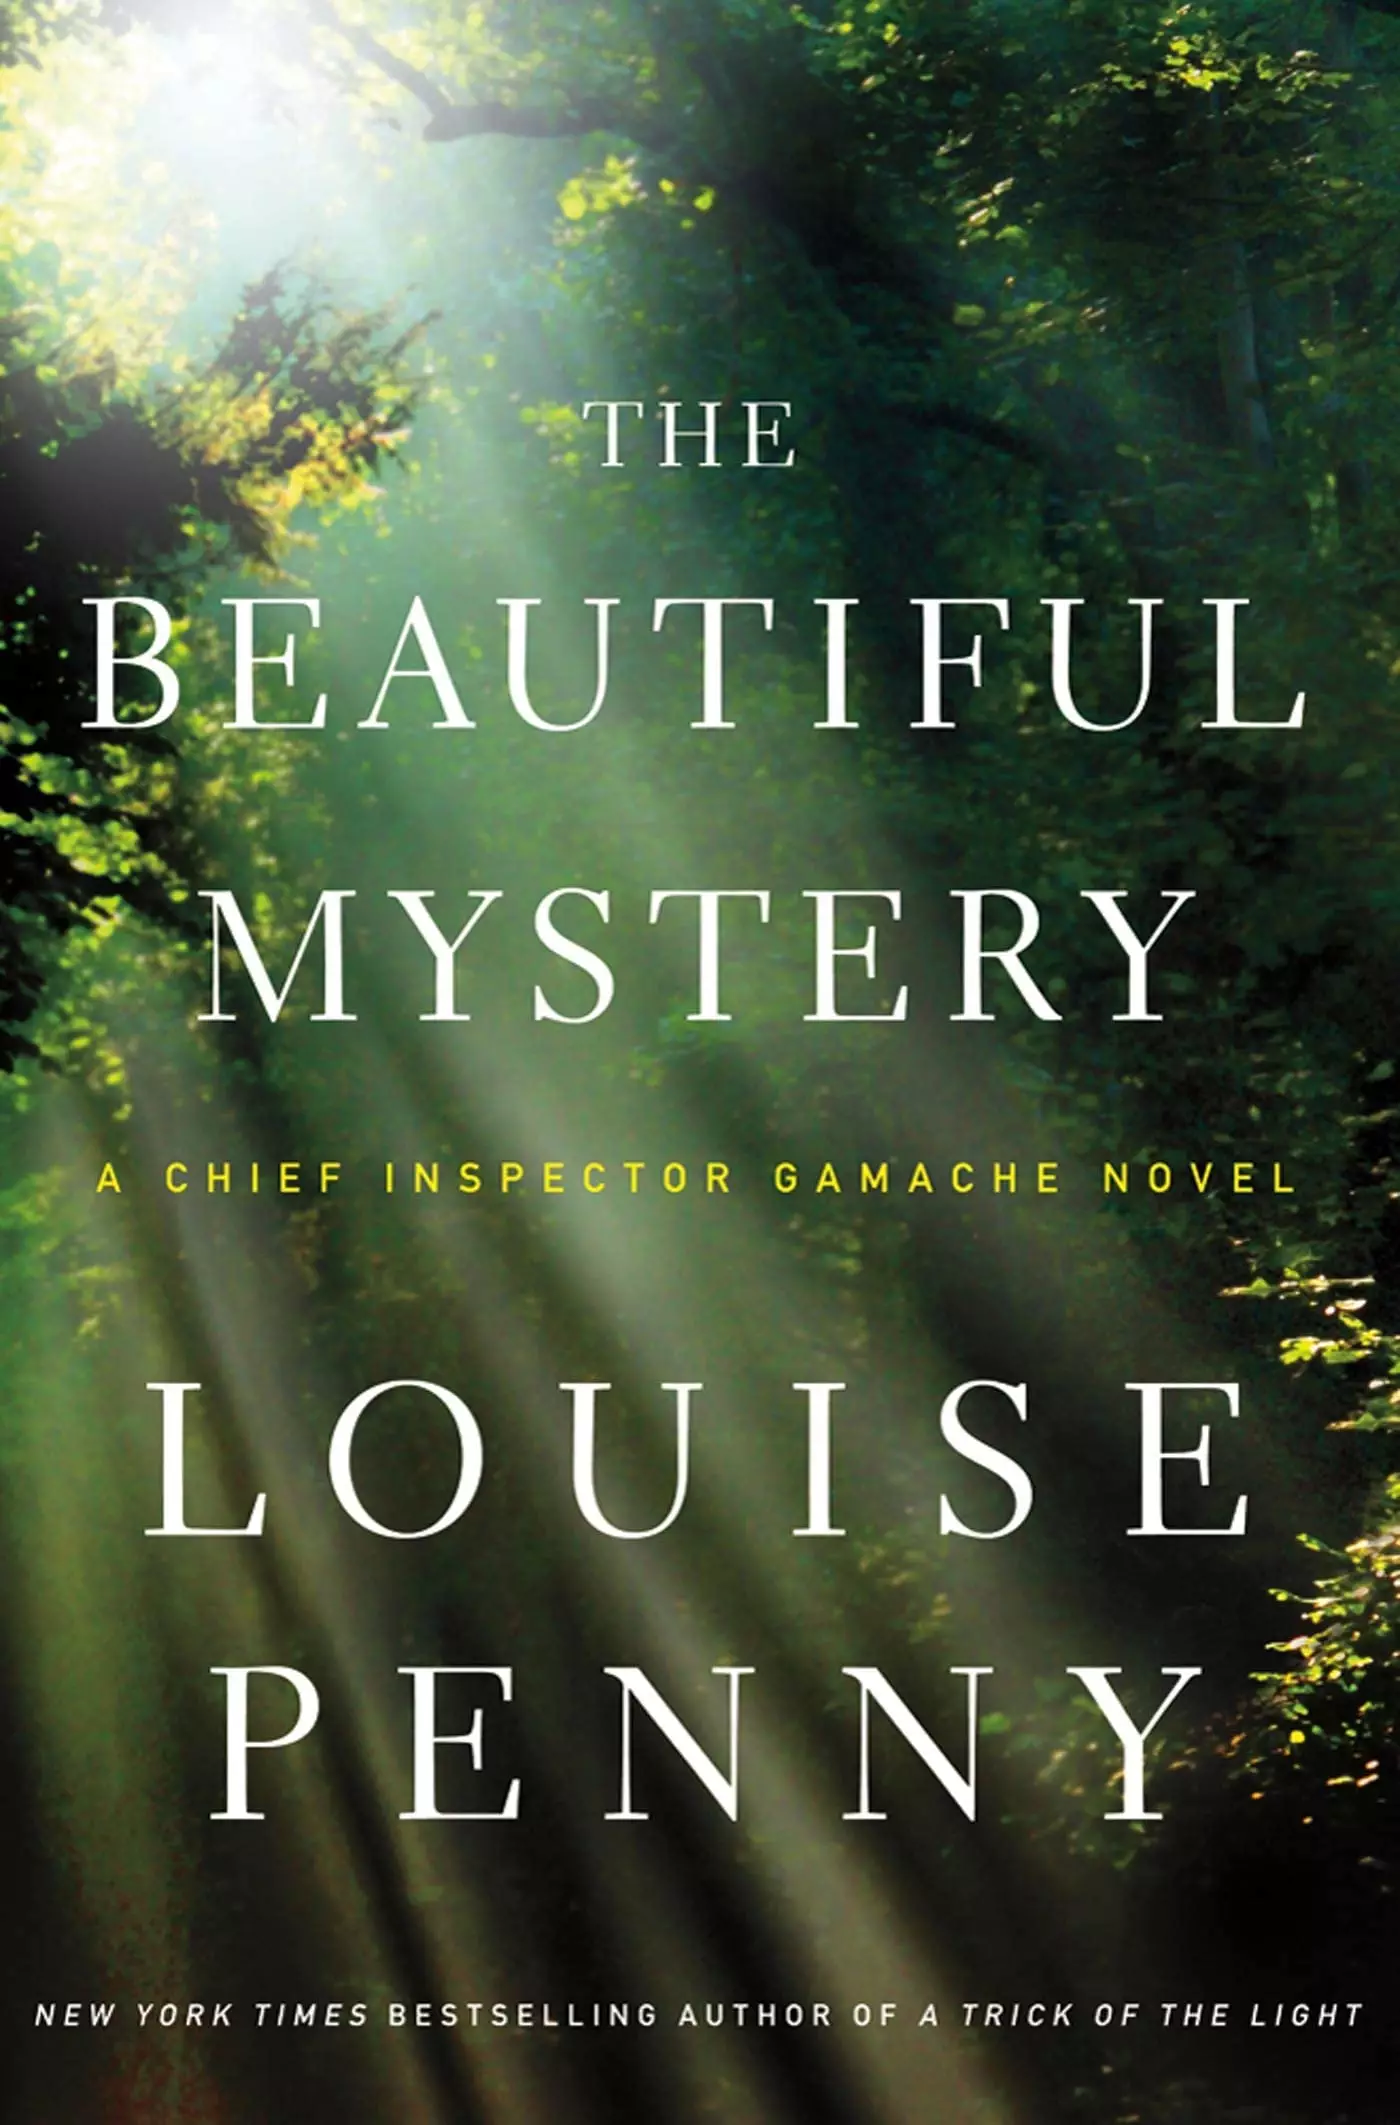 The Beautiful Mystery: A Chief Inspector Gamache Novel : Penny, Louise:  Amazon.in: Books